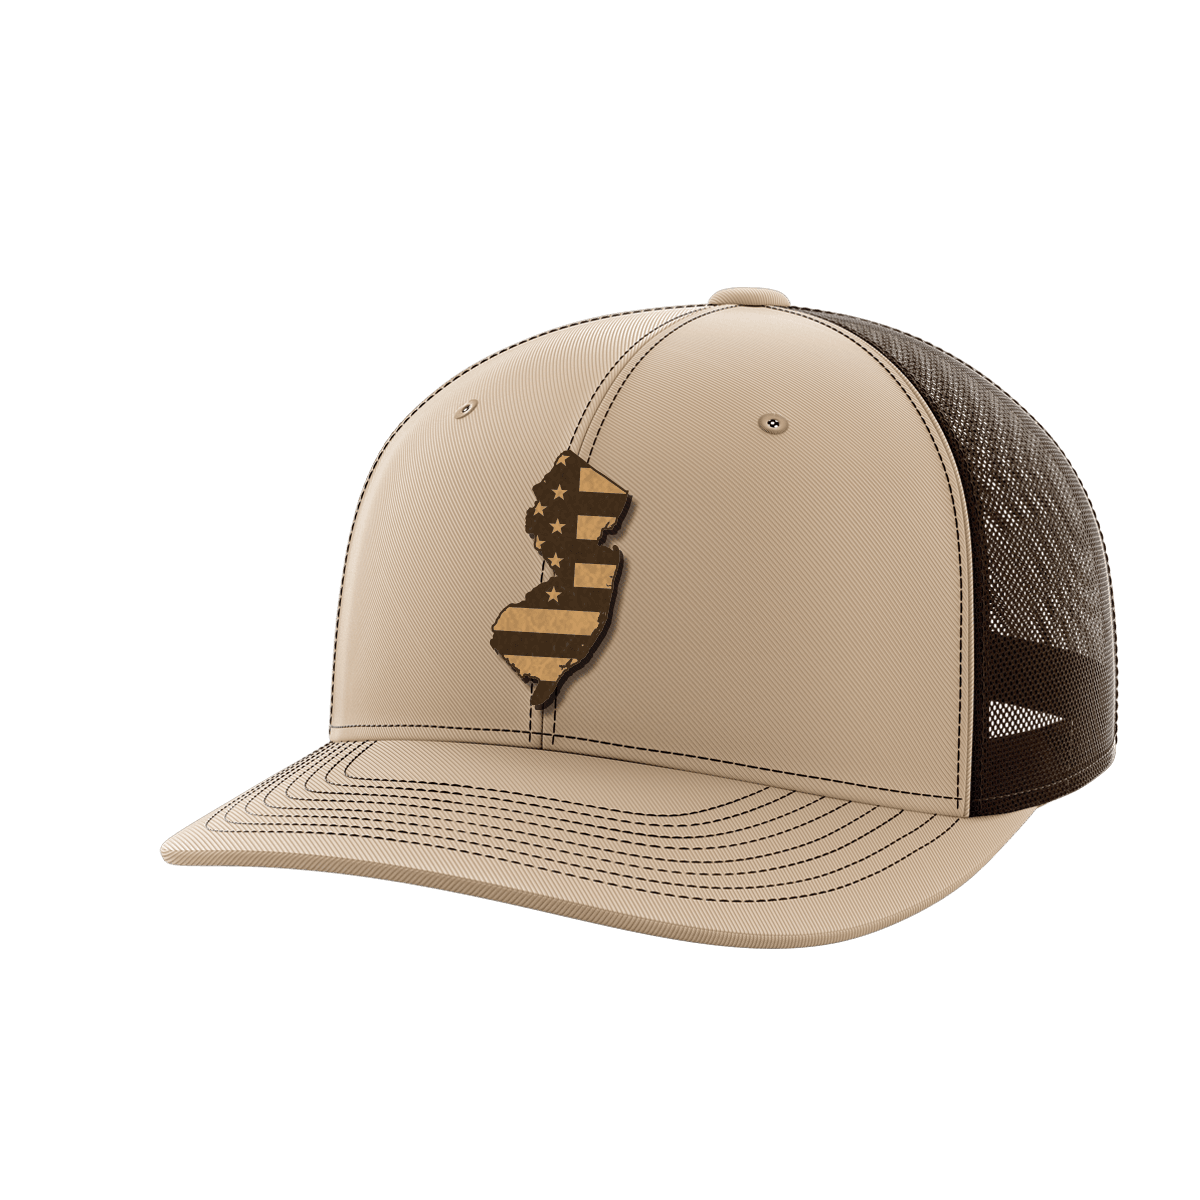 New Jersey United Hats - Greater Half